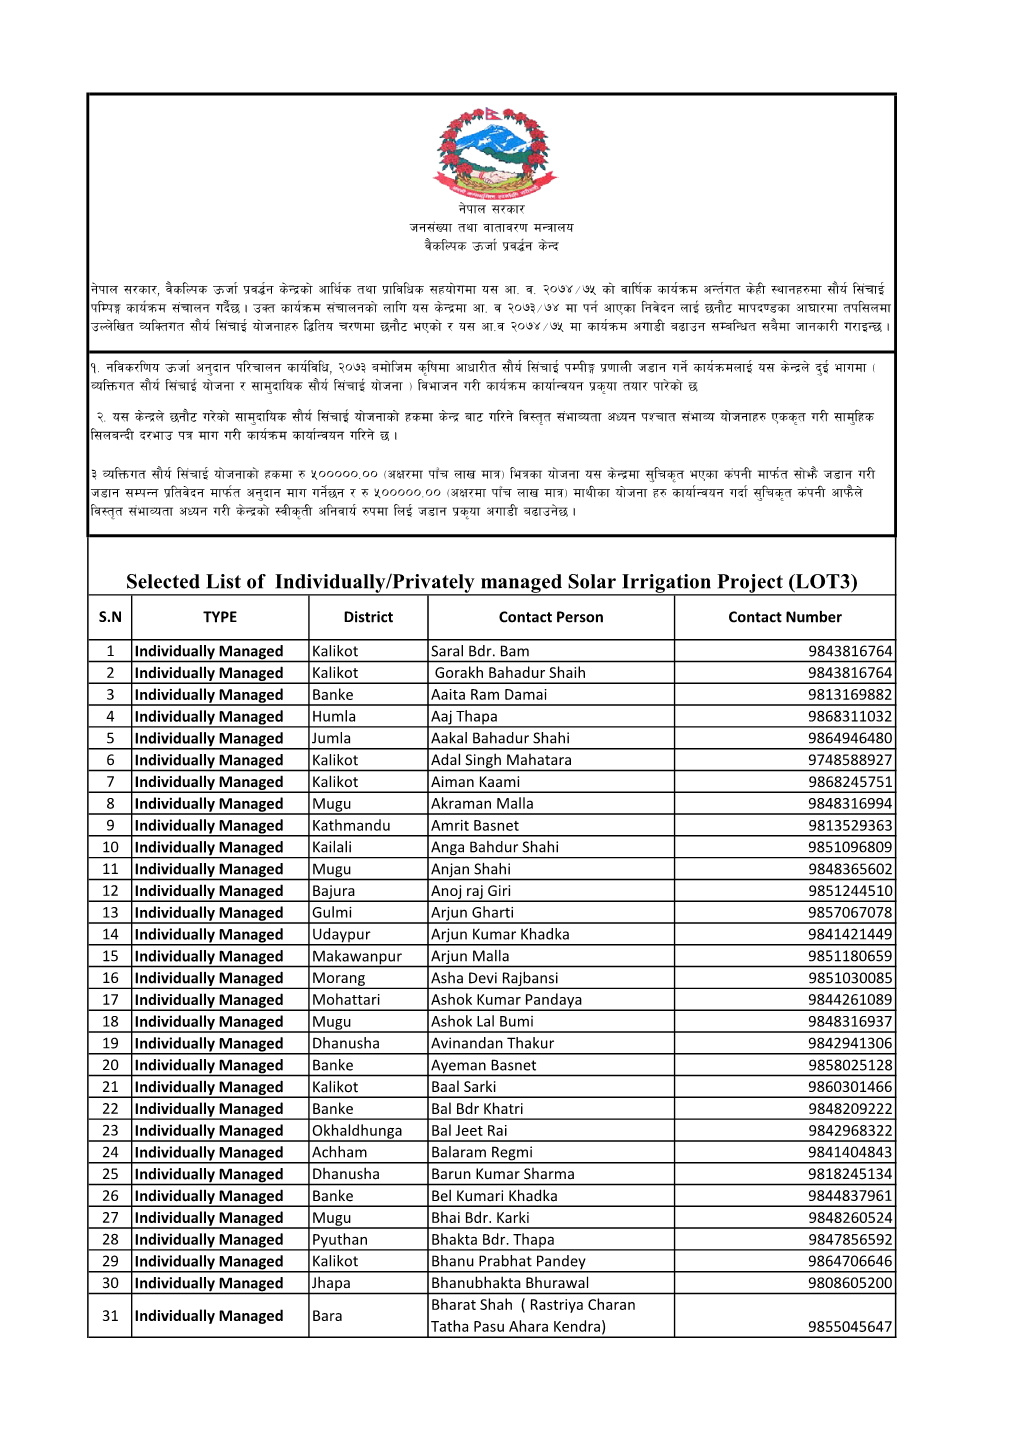 3Rd List of Individual Solar Irrigation Projects 2074-75